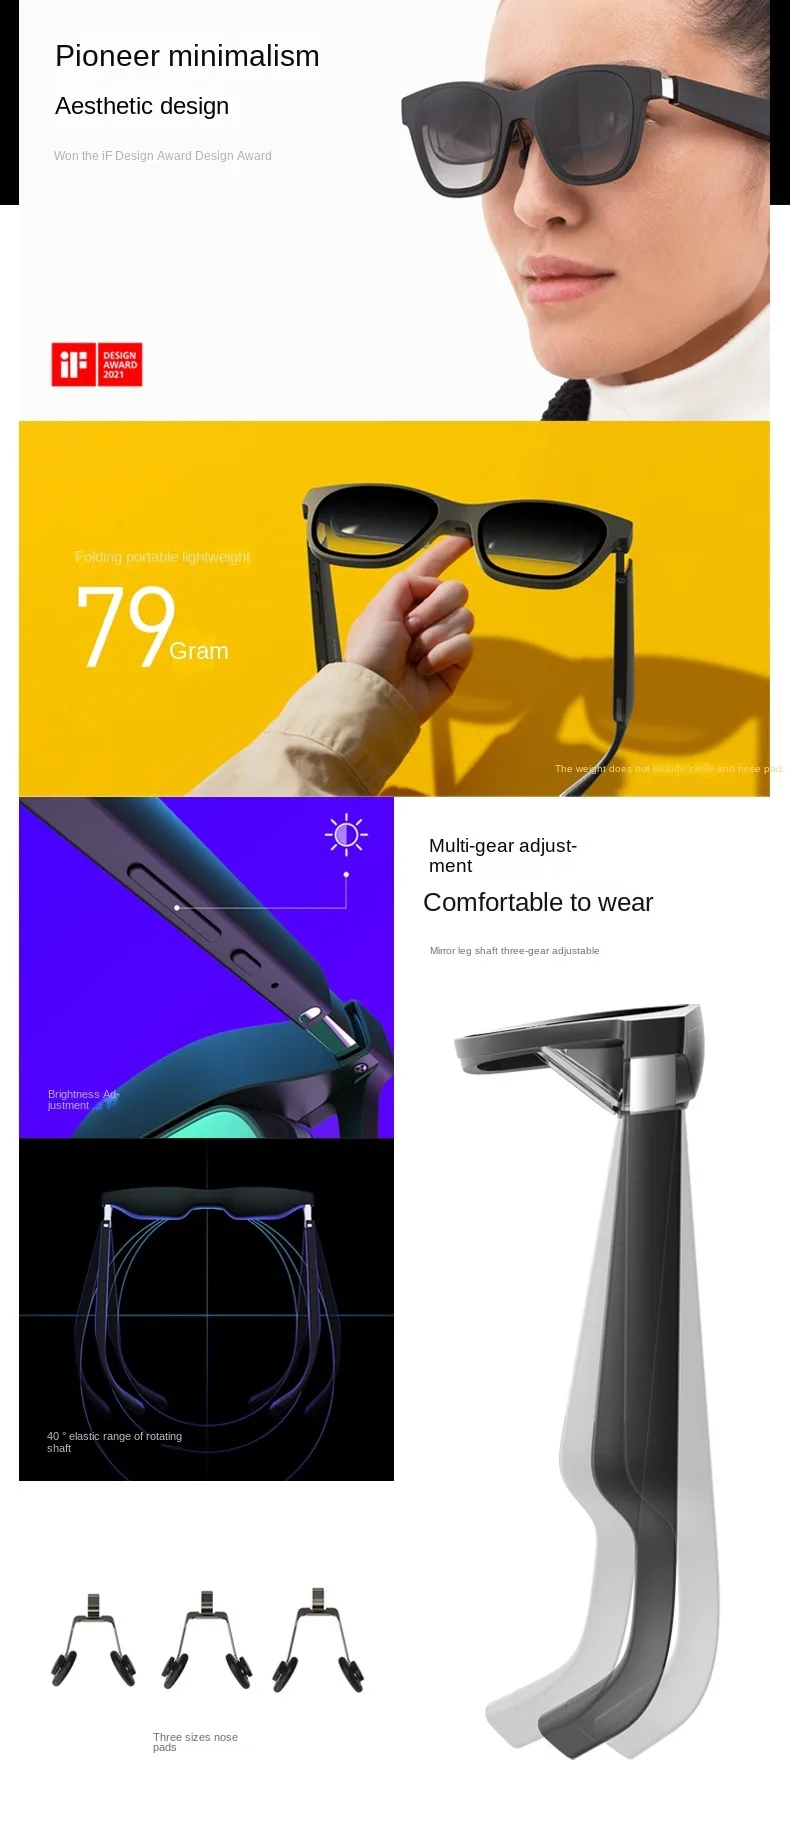 xreal air ar smart glasses rts